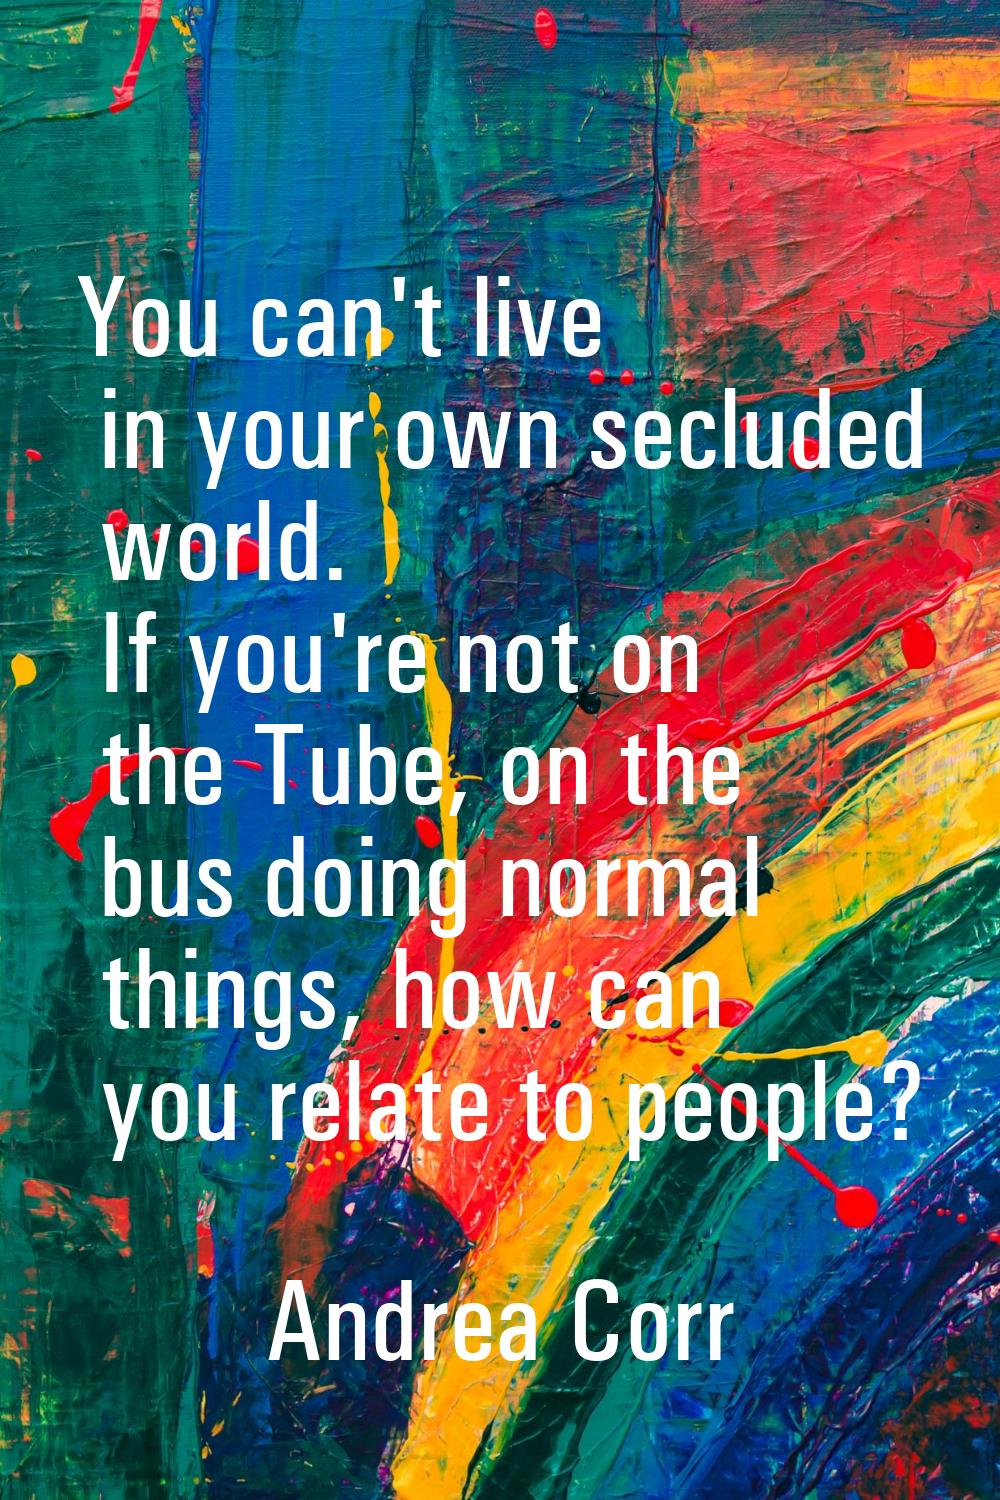 You can't live in your own secluded world. If you're not on the Tube, on the bus doing normal thing